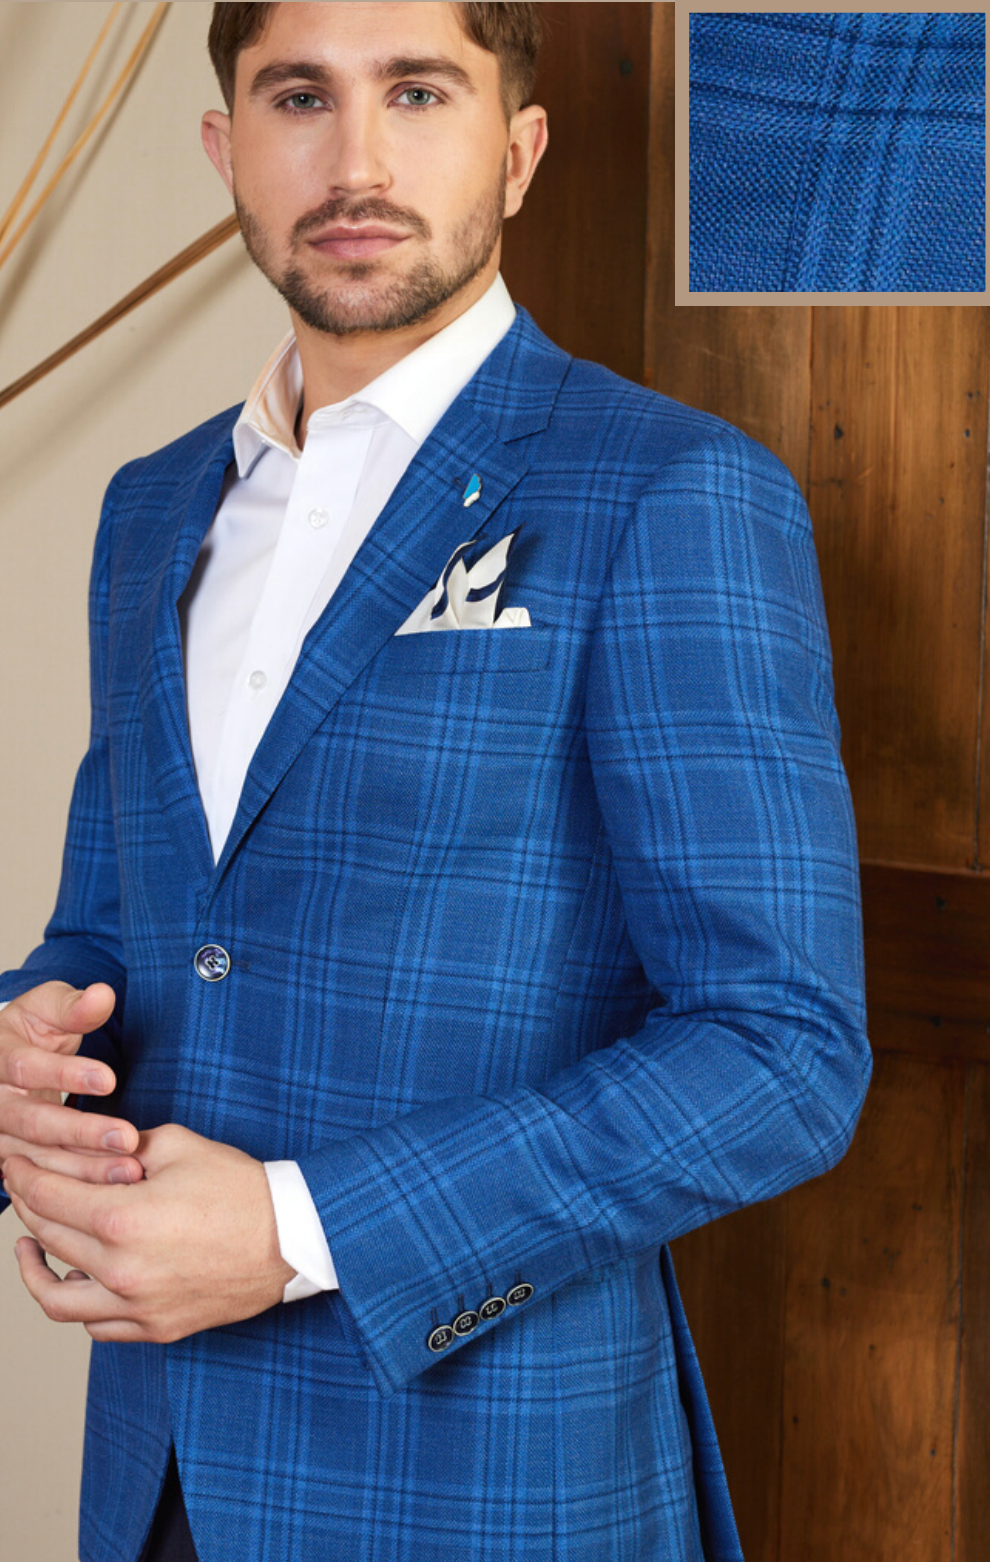 Abram Sports Coat- Blue-JW19  https://harrysformenswear.com.au/products/abram-sports-coat-blue-jw19  Savile Row Super Fine Wool Sportscoat Harrys for Menswear is your local suit specialist, stocking one of the largest ranges in our Dubbo, Central West NSW region. Limited Edition Specializing in Wedding Parties Special Events School Graduations Australian wool Made from Australian Merino 100% Wool